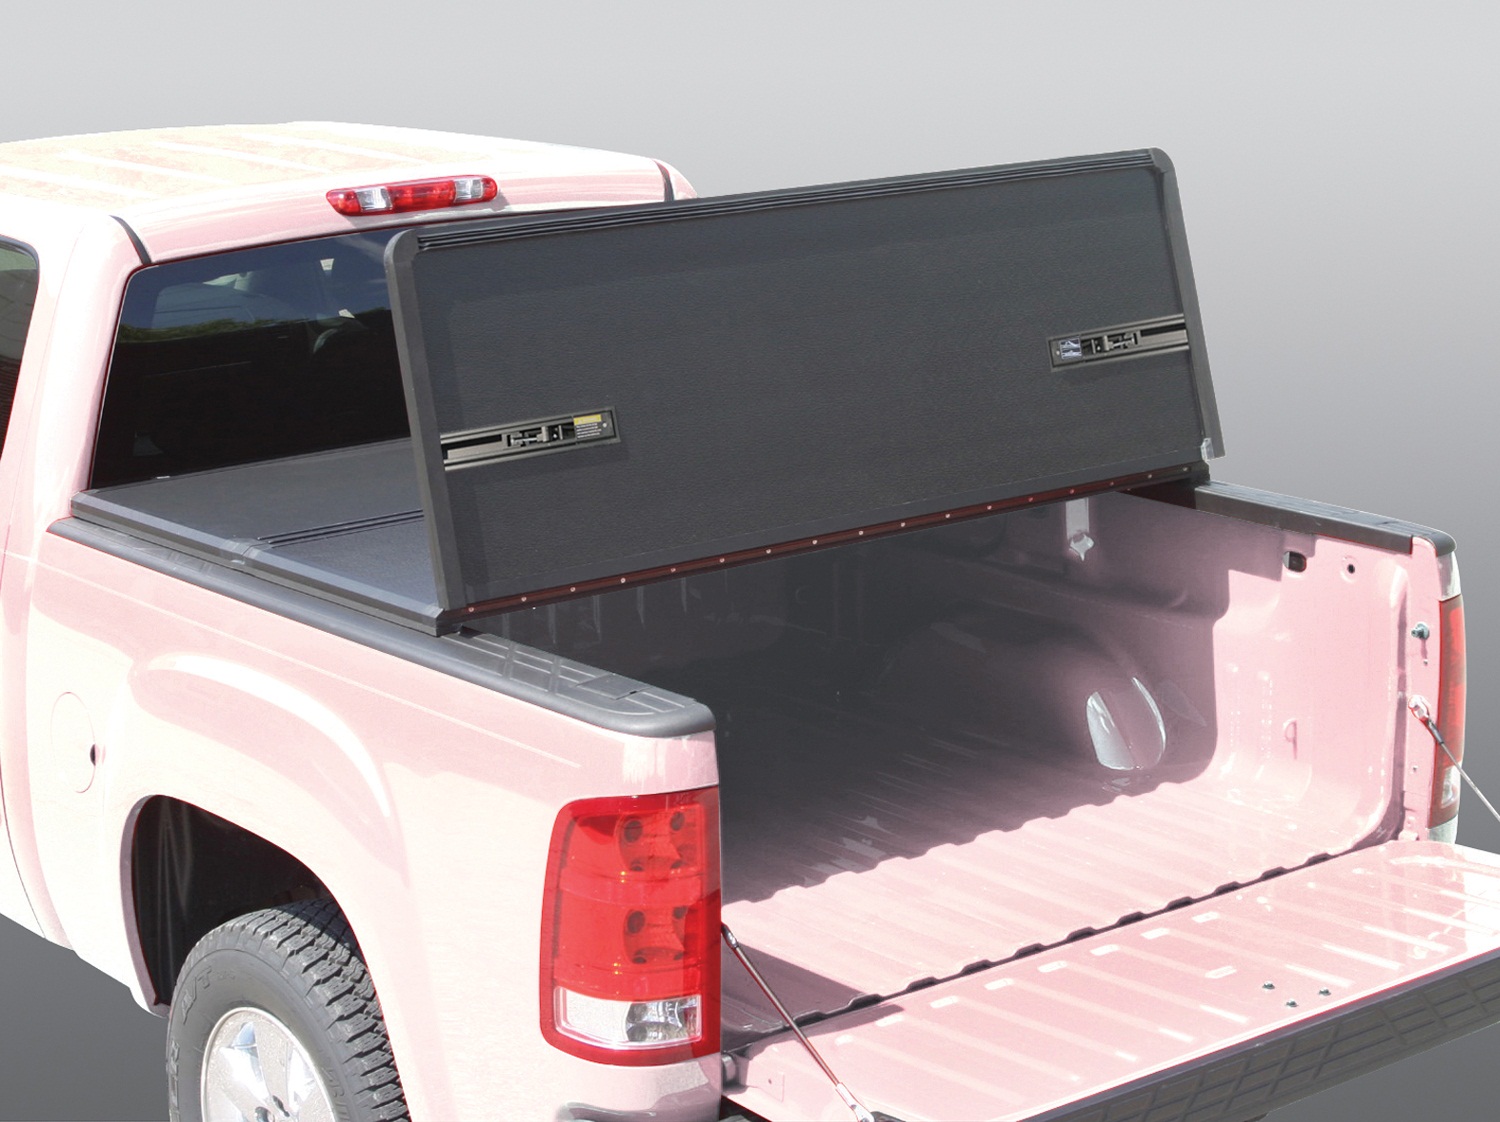 Rugged Liner Rugged Liner HC-F804 Rugged Cover; Tonneau Cover Fits 97-08 F-150 F-150 Heritage